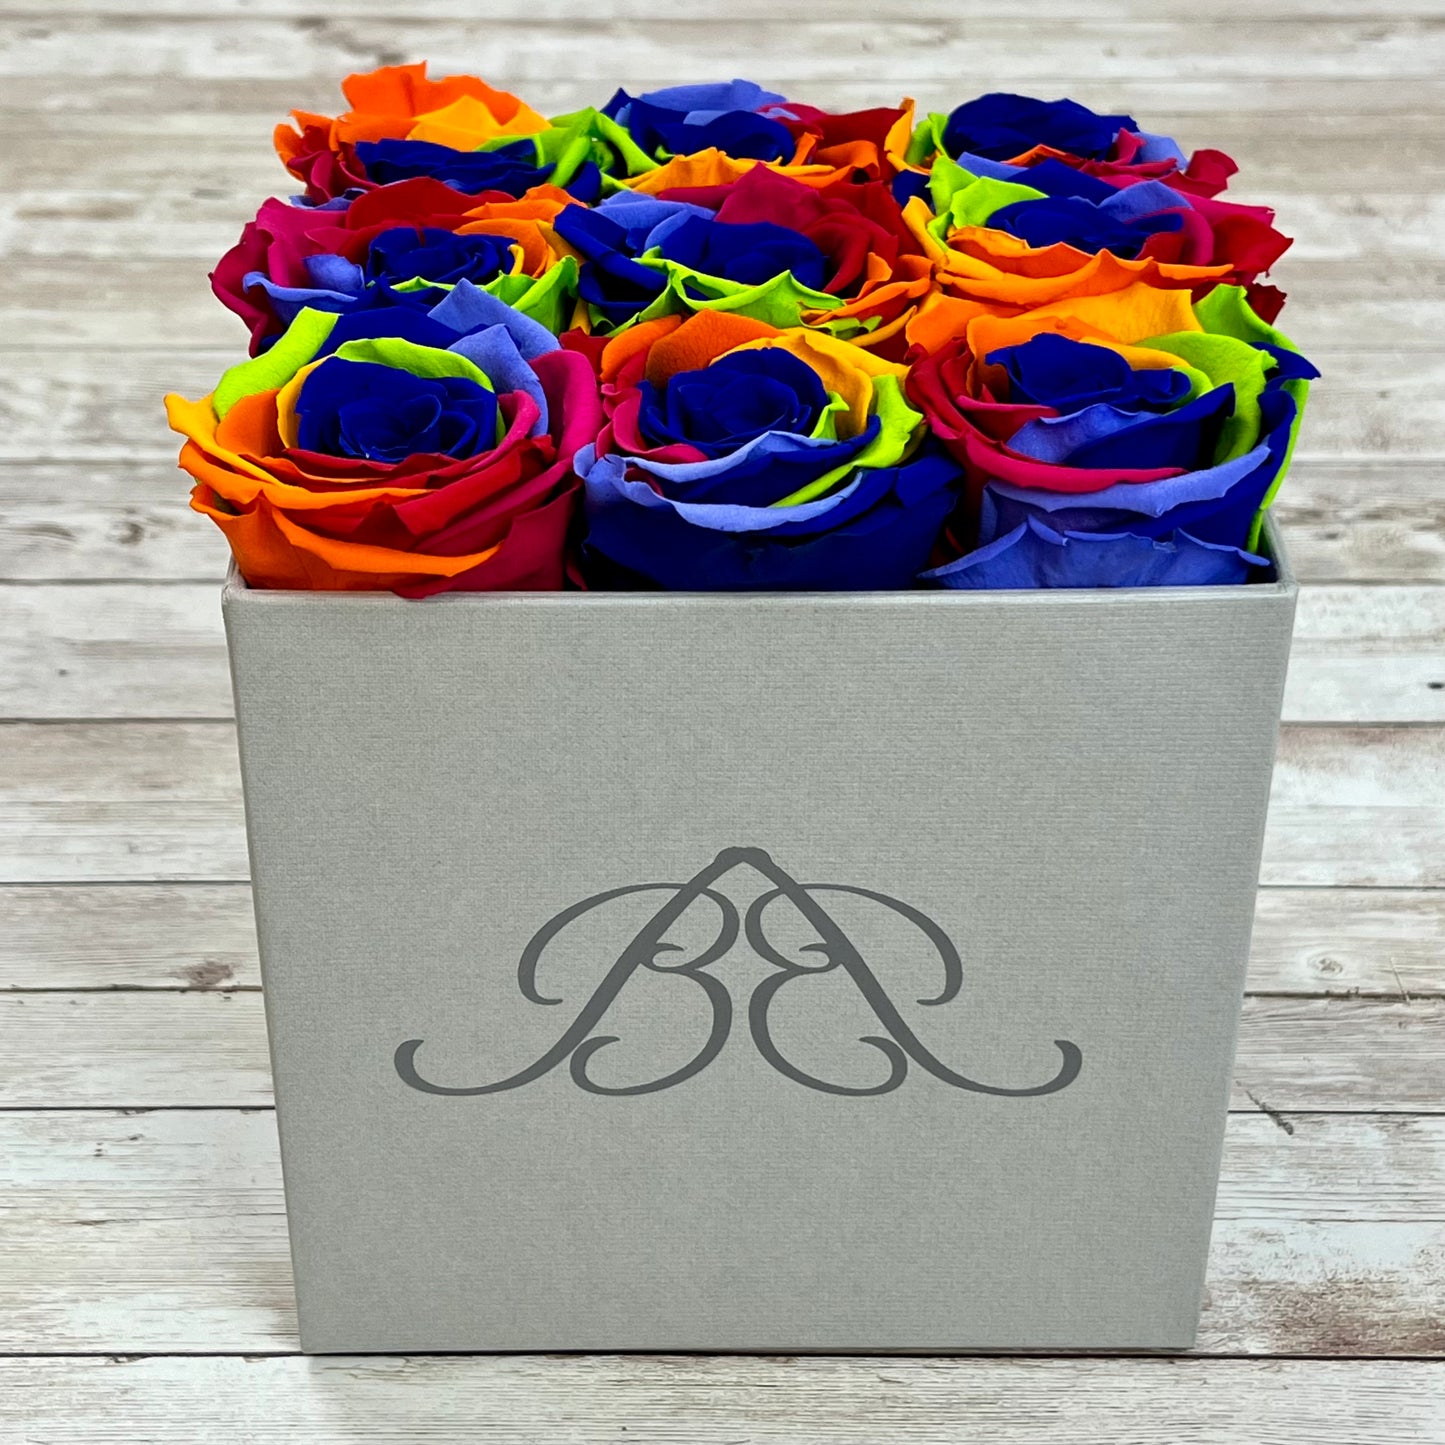 Grey square Infinity Rose Box - Infinity Roses - Rainbow One Year Roses - Square Box of Roses - Rose Colours divider-Carnival Rainbow